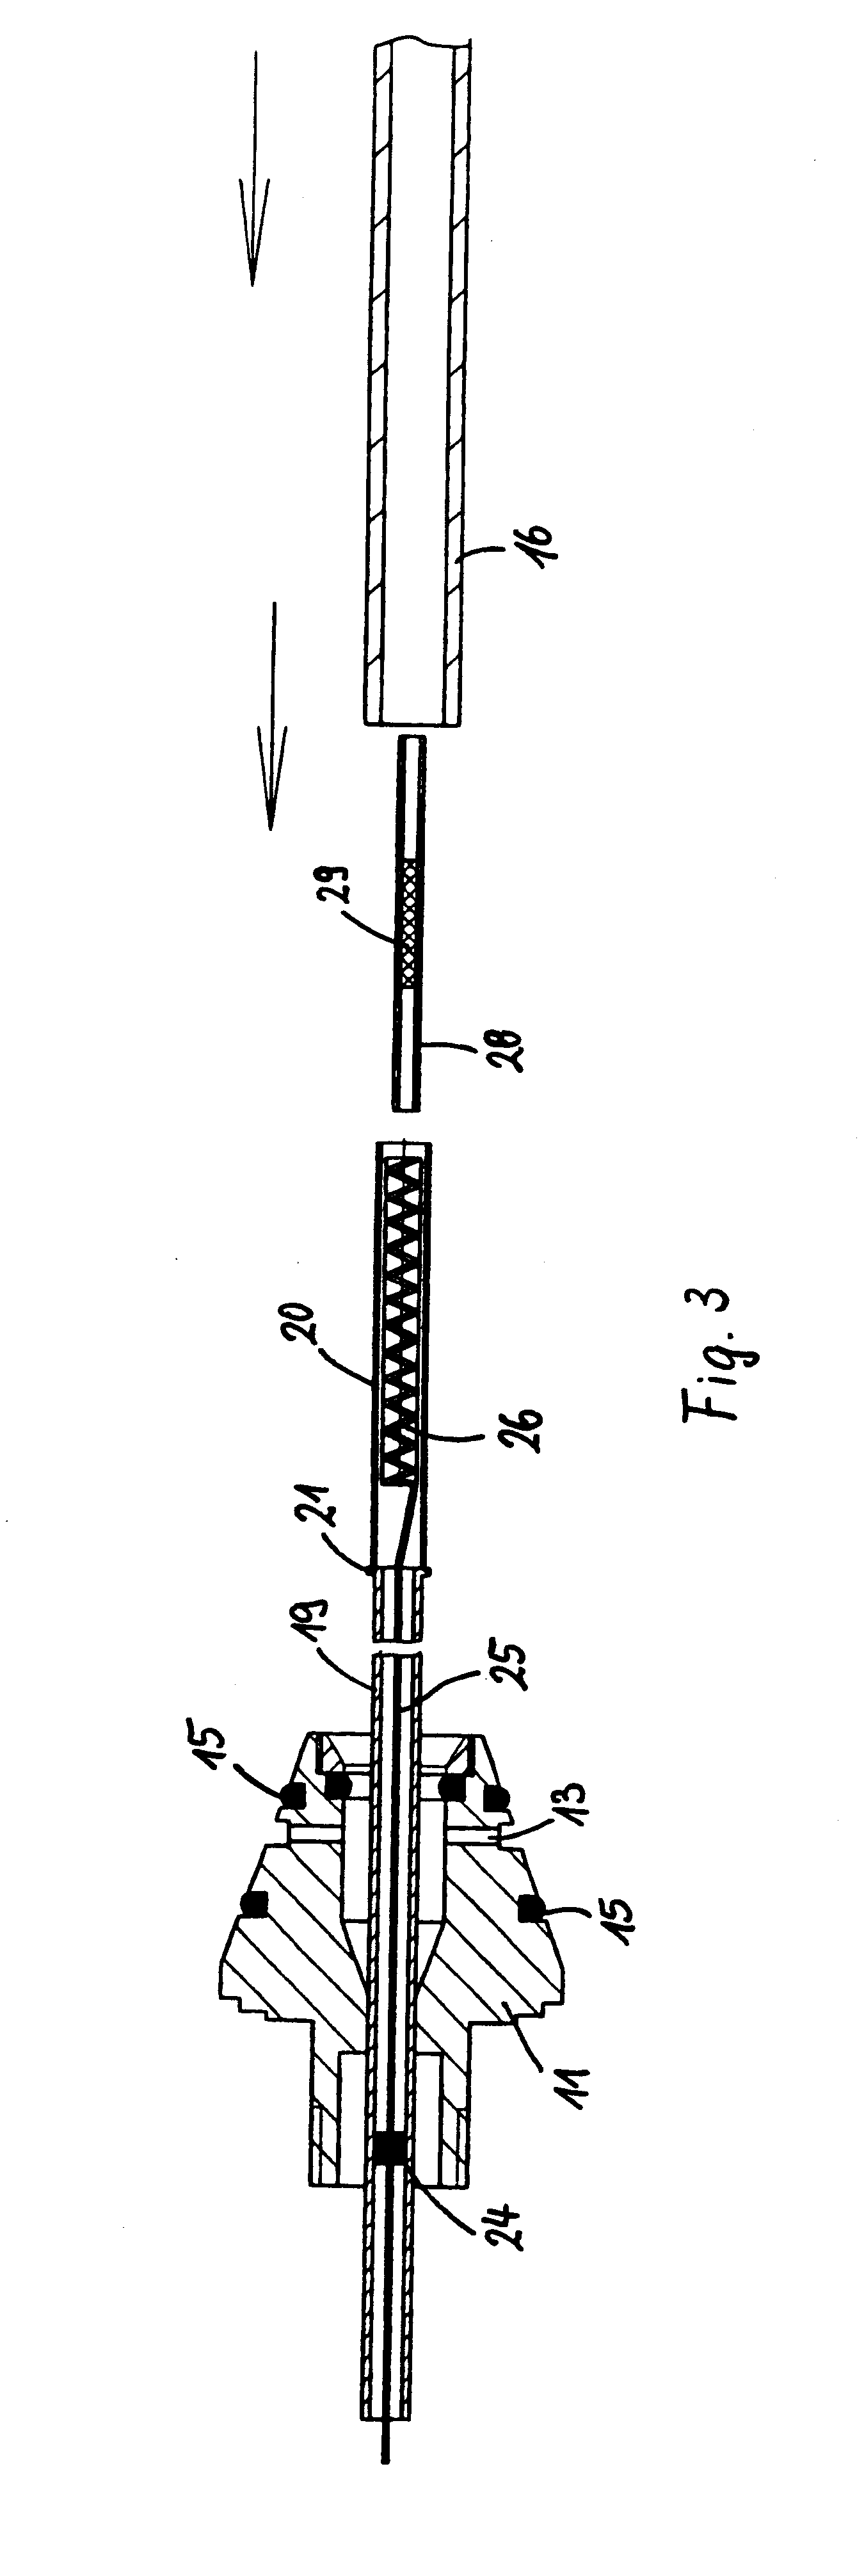 Sample application device for a gas chromatograph